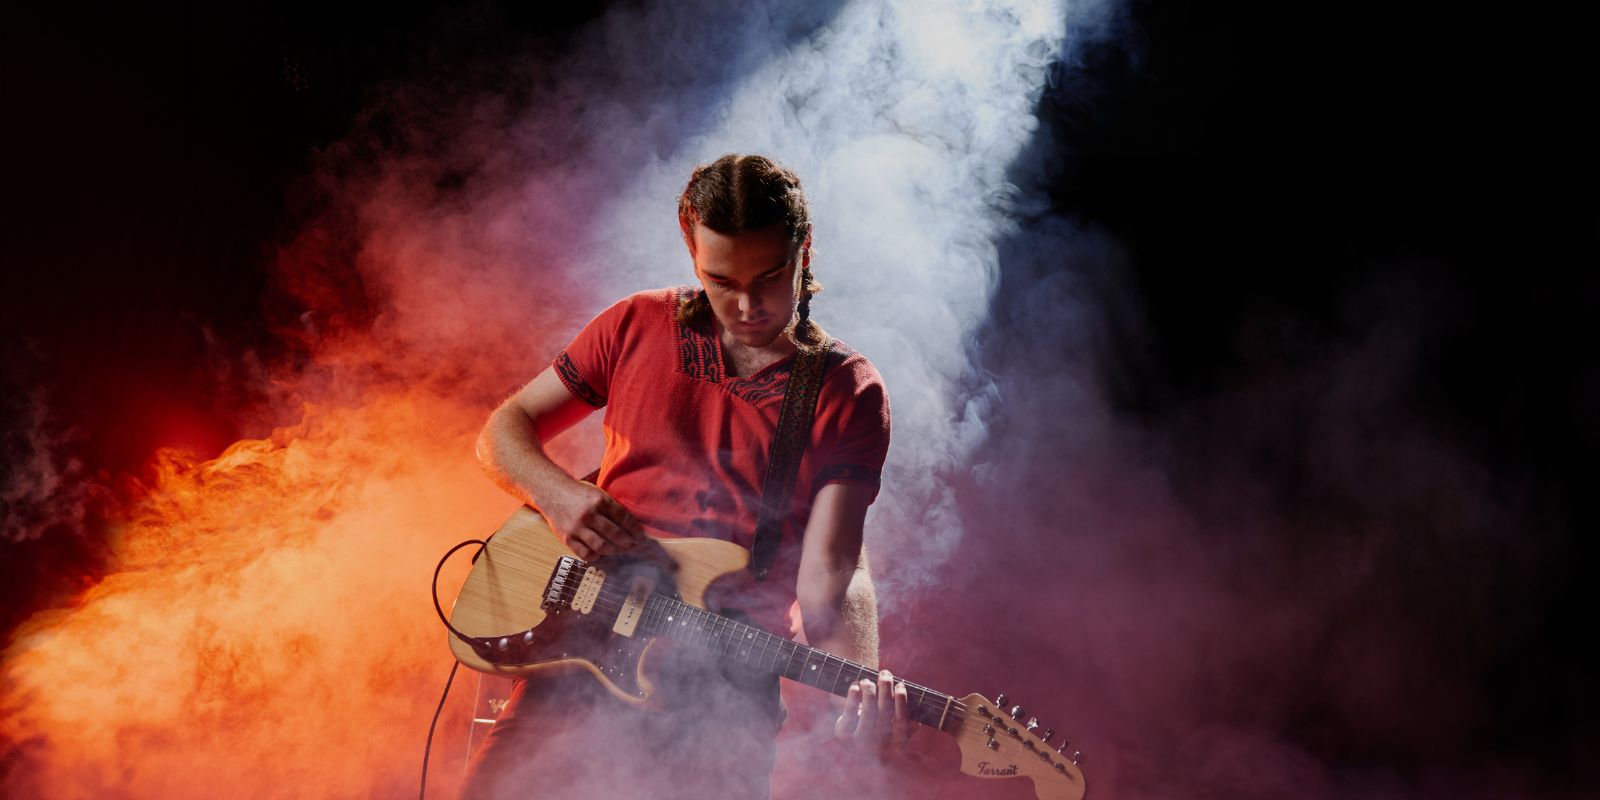 A person standing up, playing an electric guitar